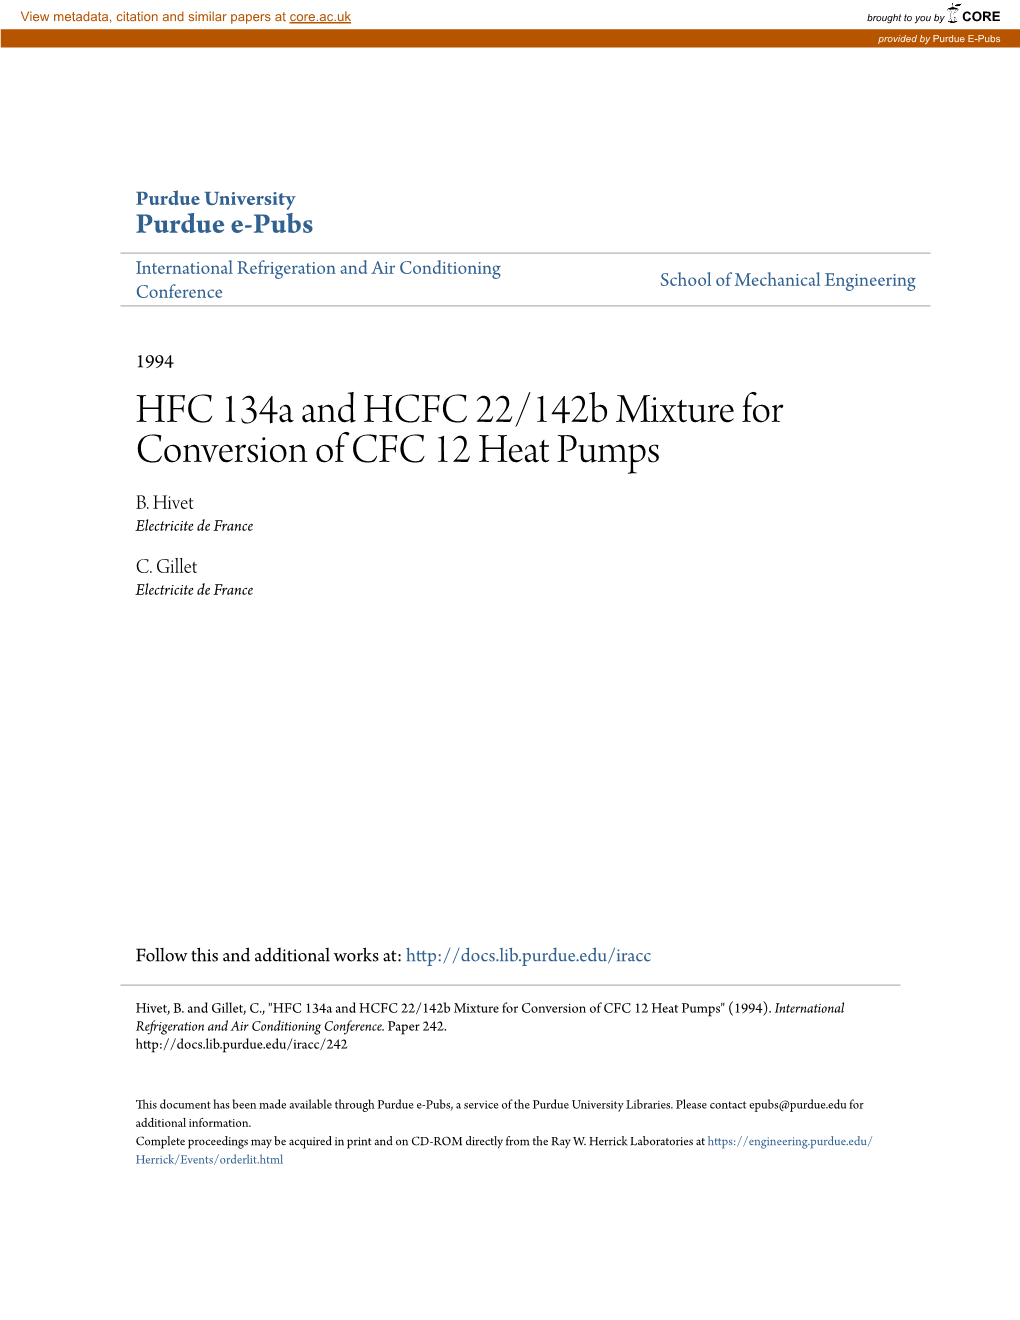 HFC 134A and HCFC 22/142B Mixture for Conversion of CFC 12 Heat Pumps B